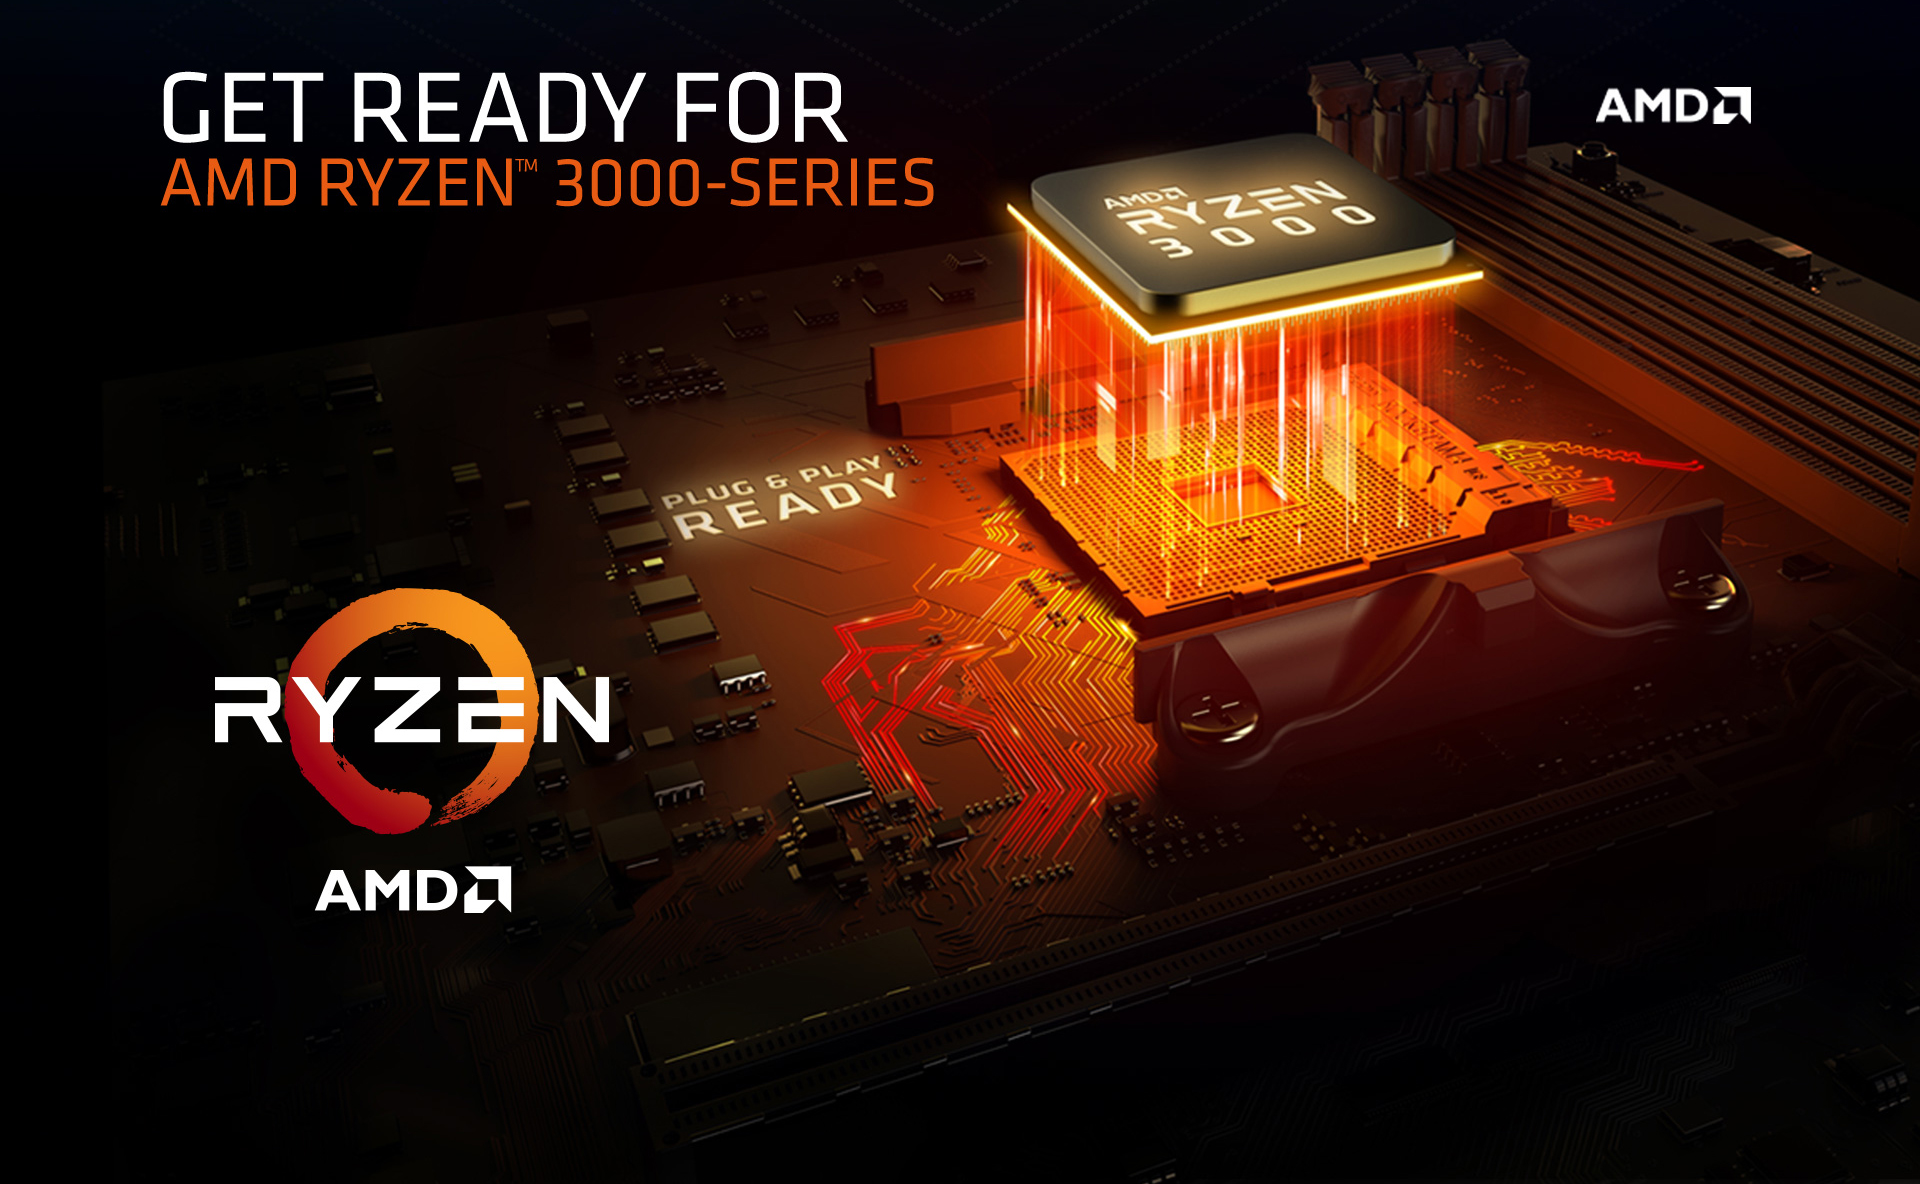 GET READY FOR AMD RYZEN 3000-SERIES Banner showing a graphic of an AMD Ryzen 3000 CPU Rising up from a motherboard next to the RYZEN AMD Logos